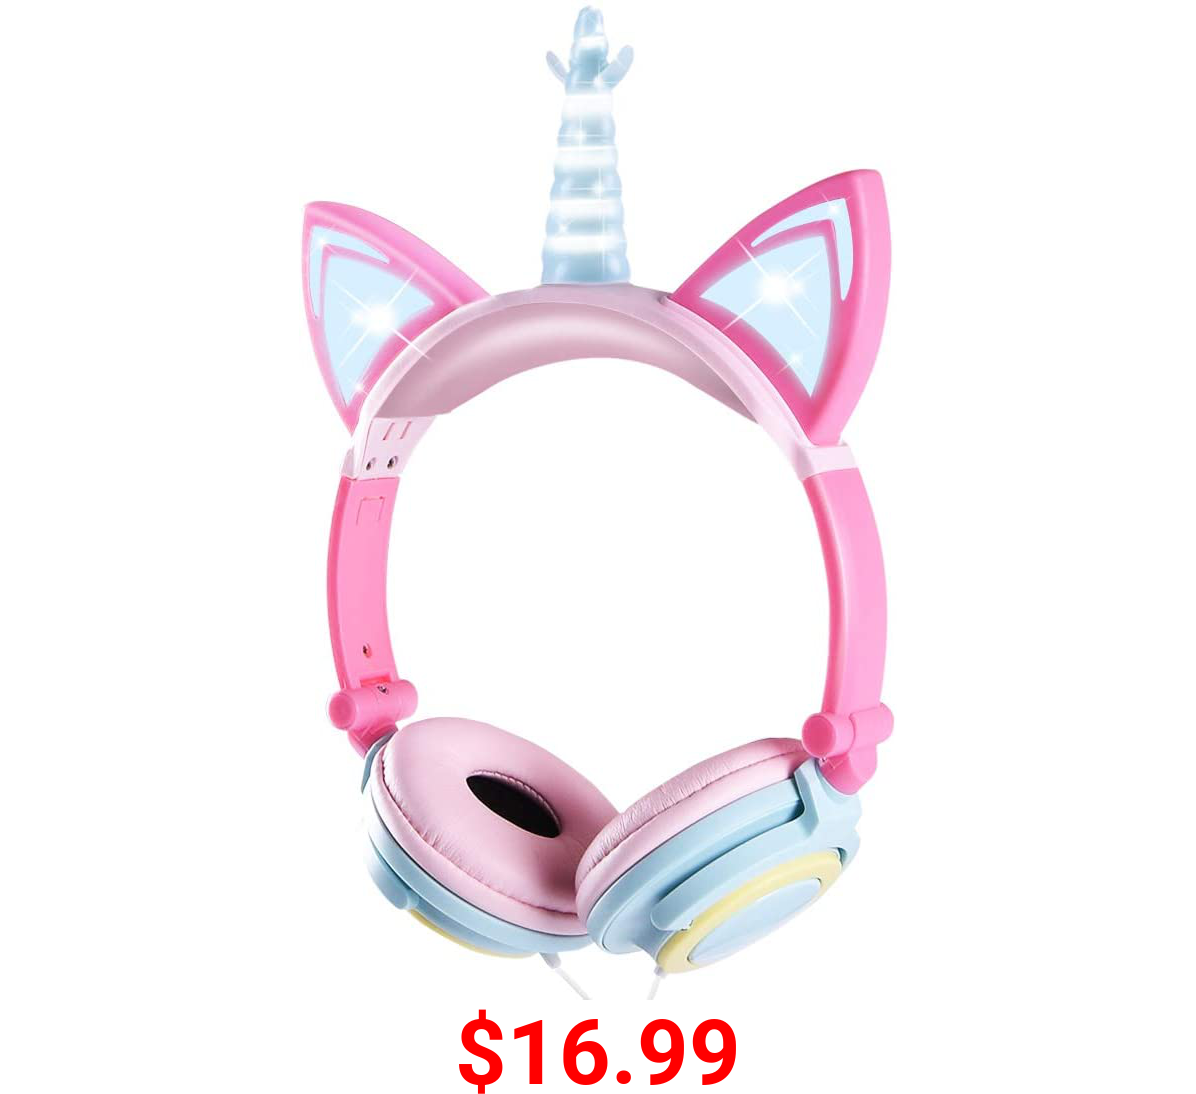 Kids Headphones, Cute Unicorn Cat Ear Headphones Foldable and Adjustable Safe Wired Kids On Ear Headphones for Girls, Teen, Adult, Cosplay/Dance/Party/Birthday Gifts (Multicolor)